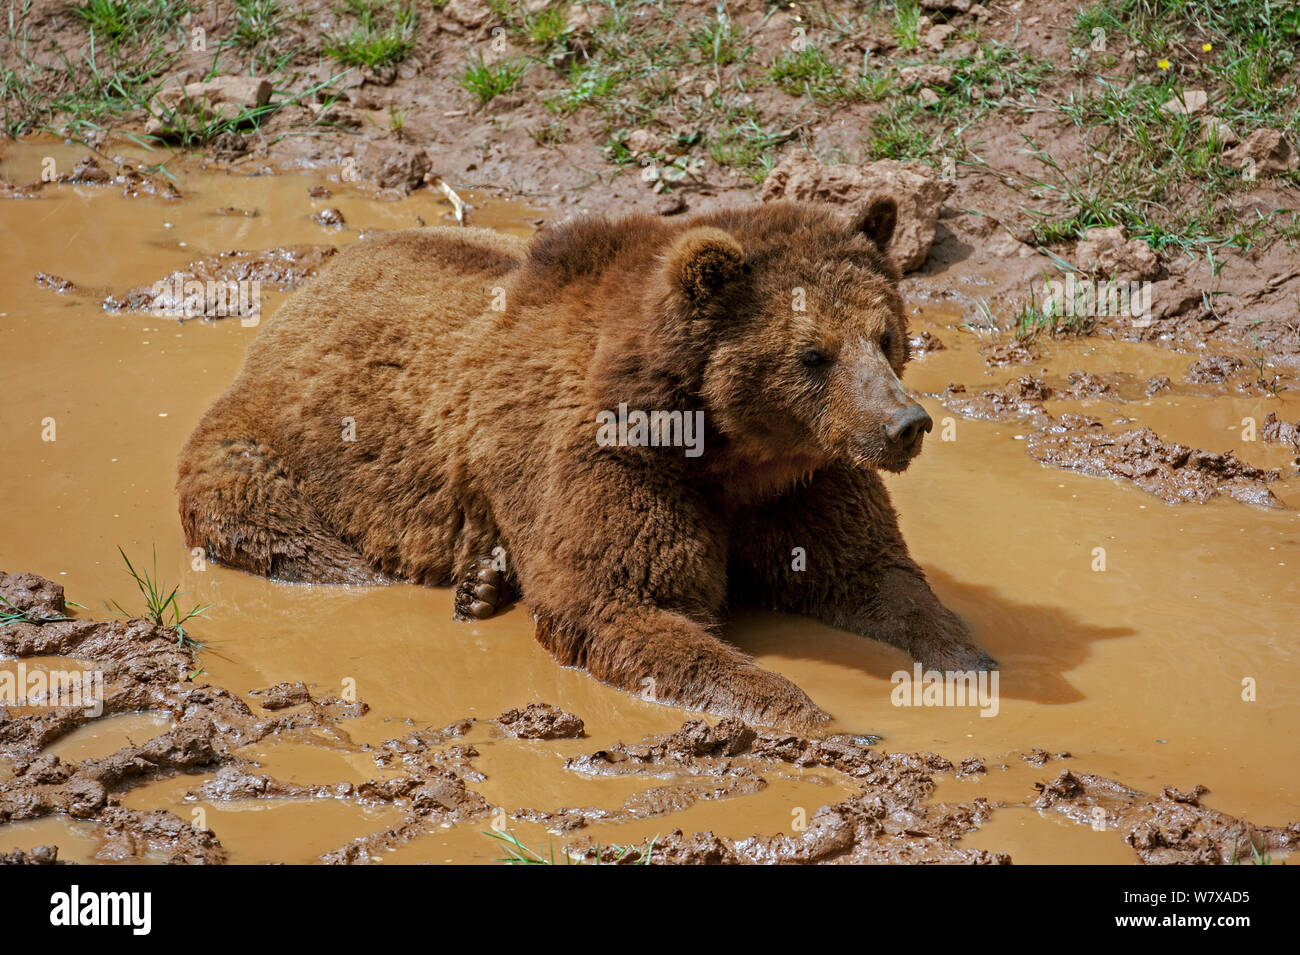 Eurasian brown bear (Ursus arctos arctos) cooling down in mud pool, Cabarceno Park, Cantabria, Spain, May. Captive, occurs in Northern Europe and Russia. Stock Photo